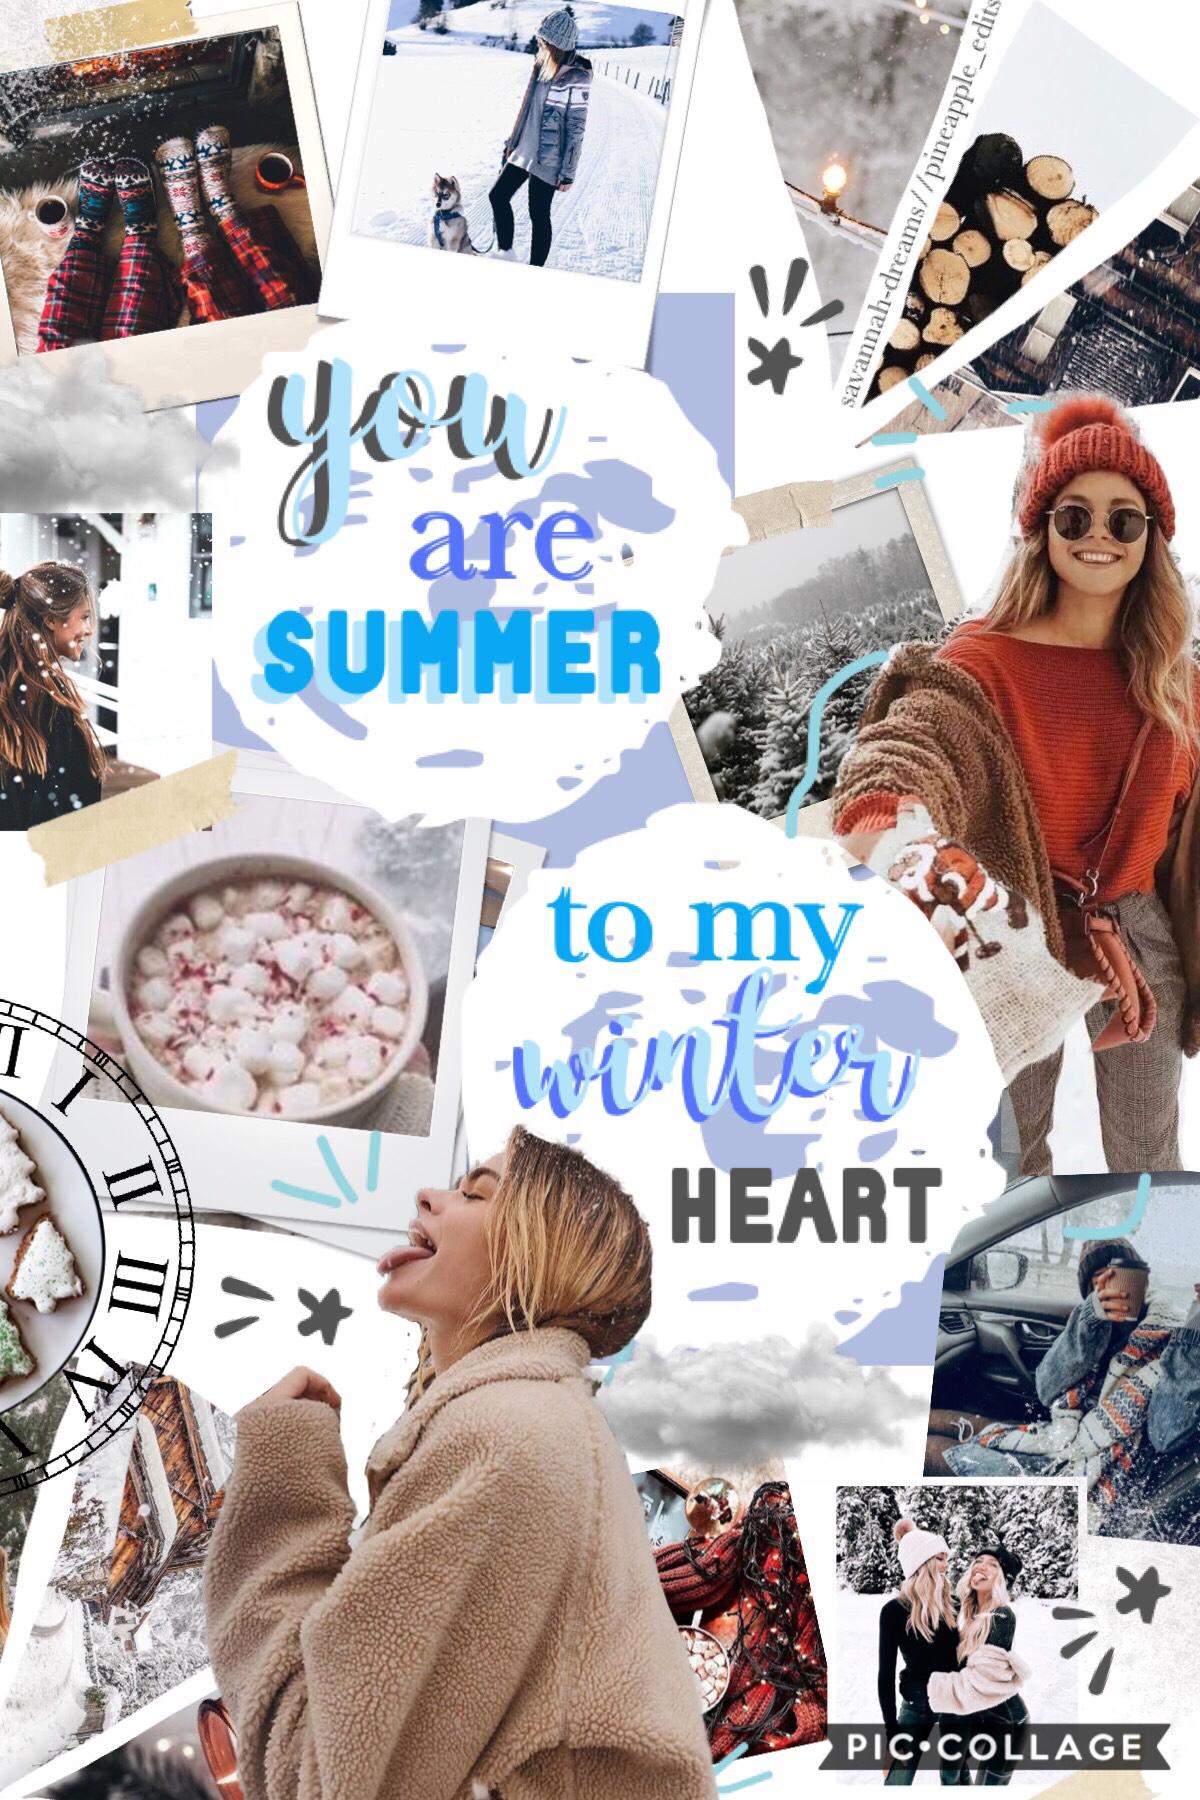 oop it's a bit early for winter collages but oh well 🤷🏼‍♀️🌨❄️ this is a collab with @pineapple_edits ✨🐋 she found one of the bgs and i did everything else 🐚✌🏼 